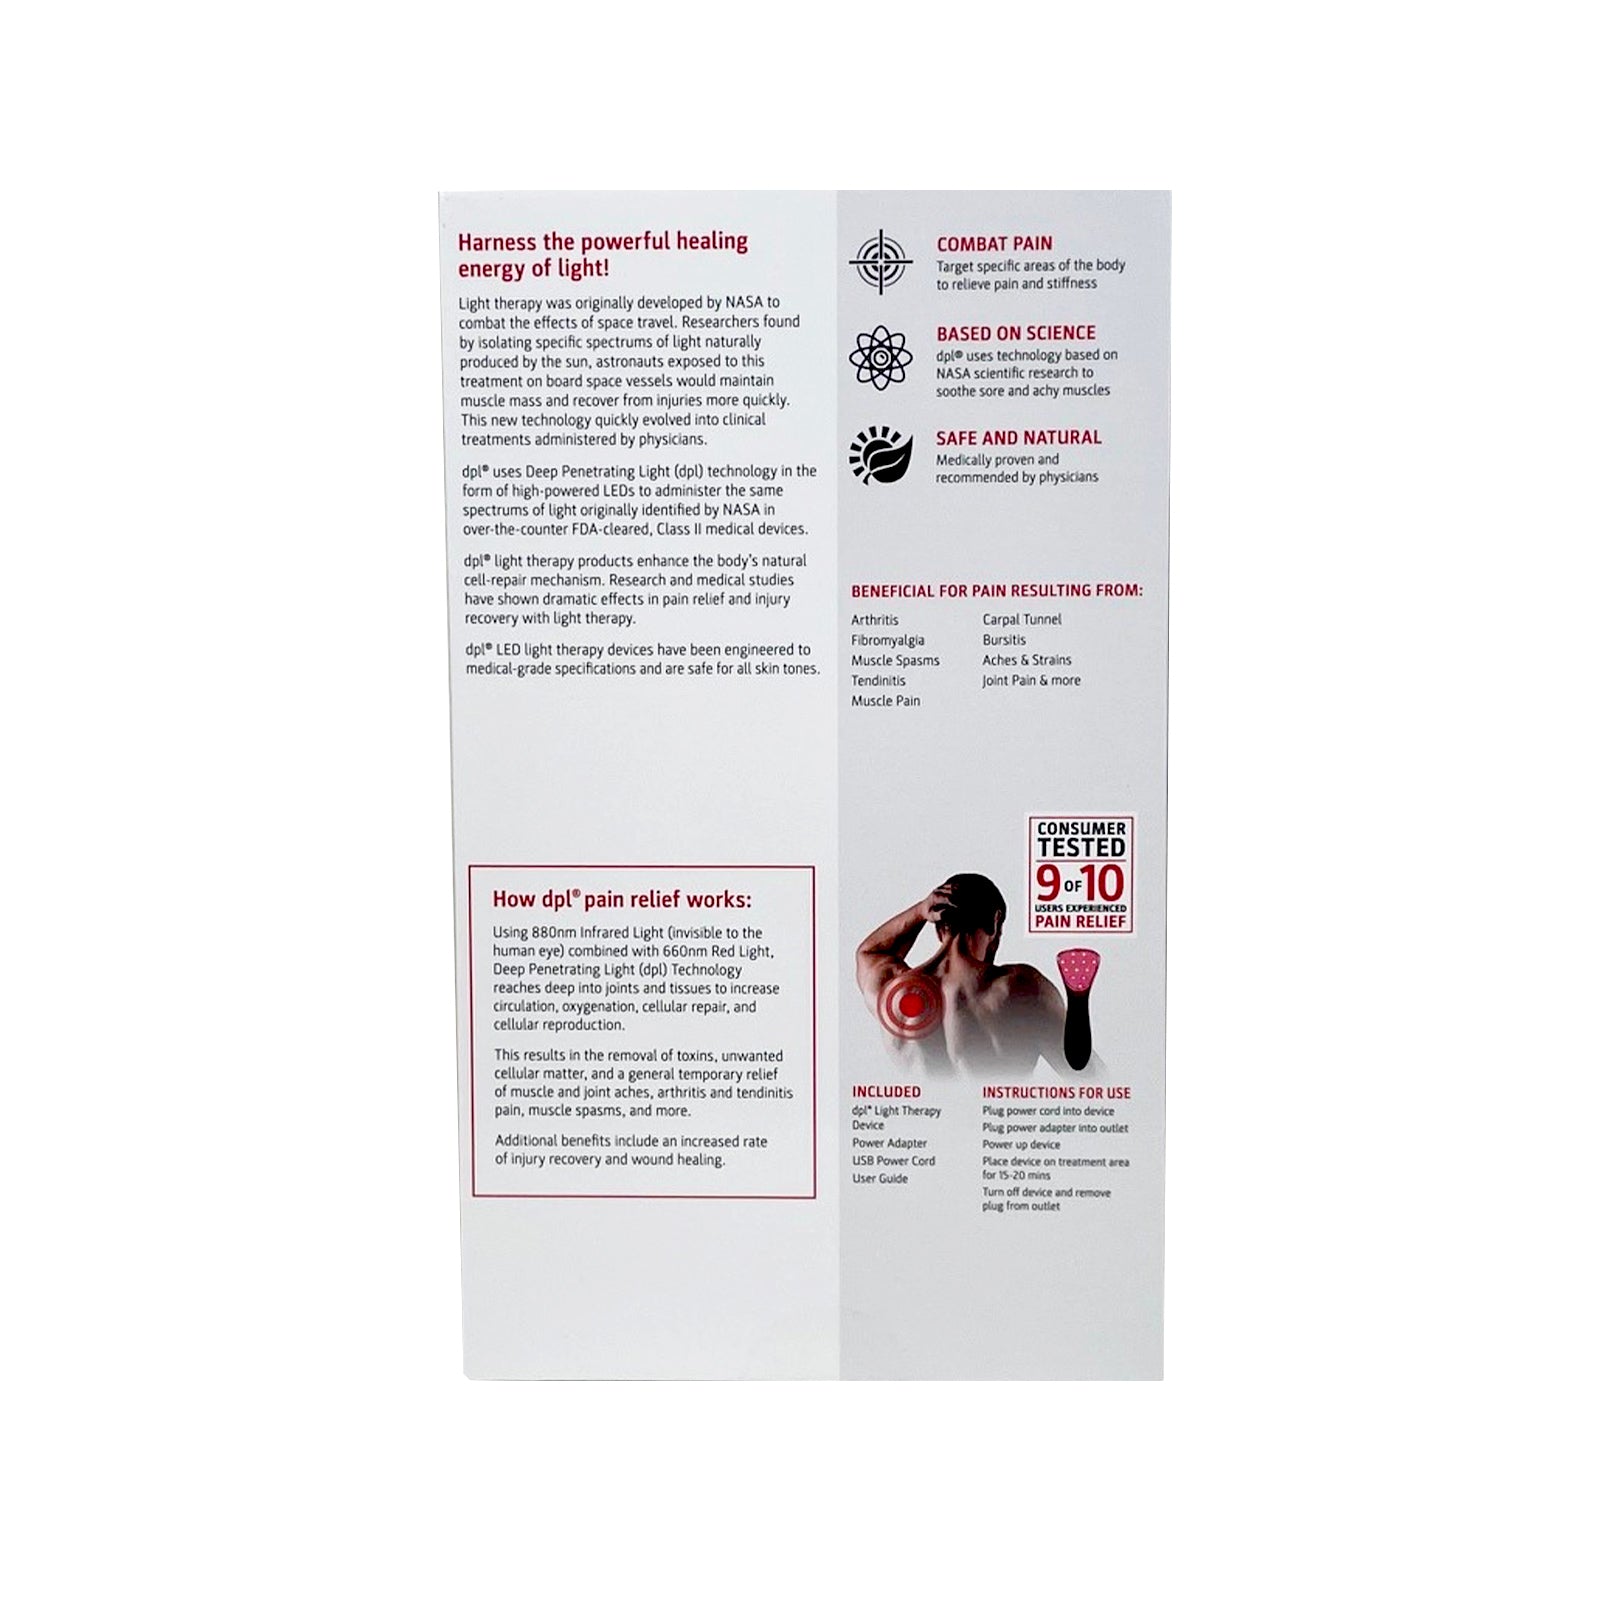 The back of the packaging for the DPL Clinical Handheld Light Therapy for Pain Relief